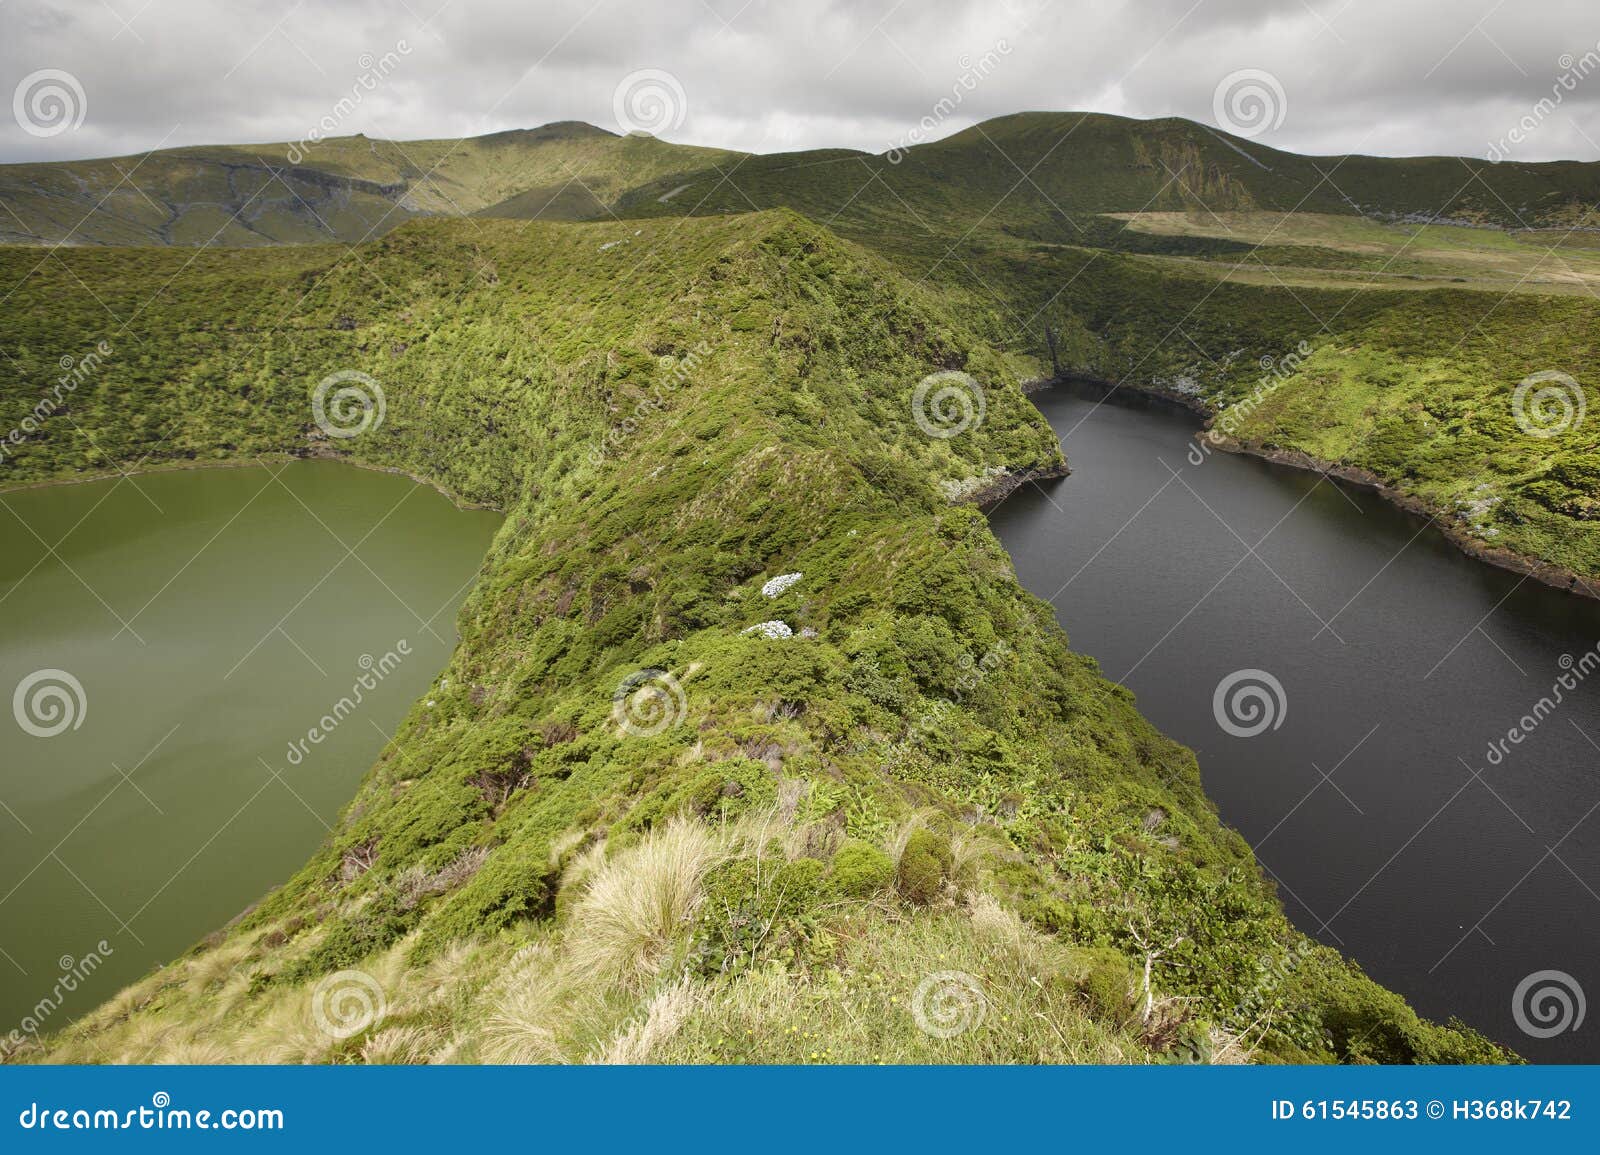 azores landscape with lakes in flores island. caldeira comprida